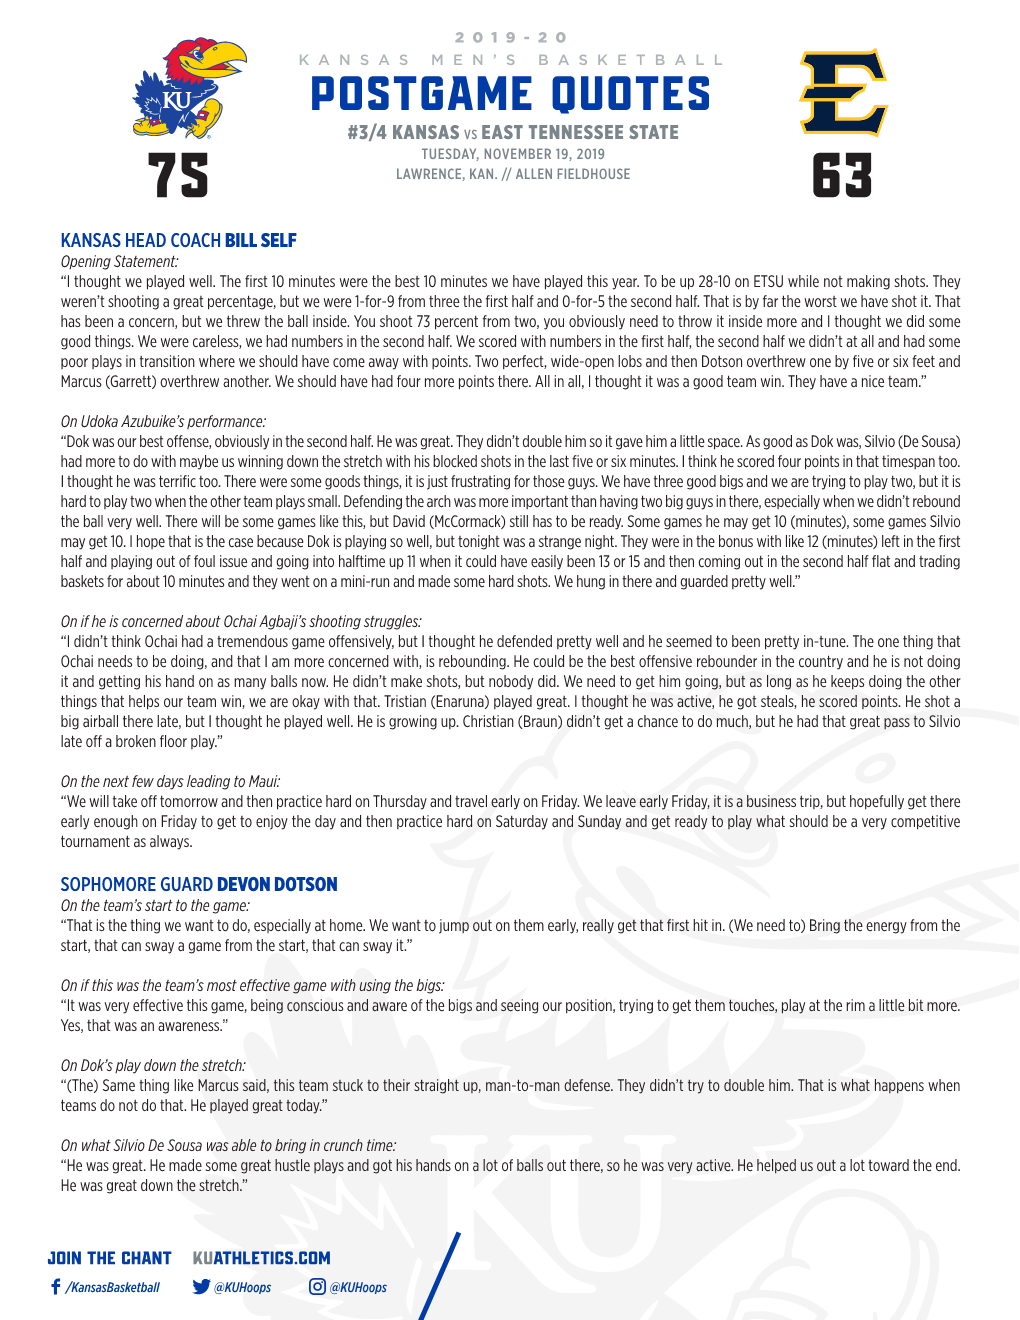 Postgame Quotes #3/4 Kansas Vs East Tennessee State Tuesday, November 19, 2019 75 Lawrence, Kan